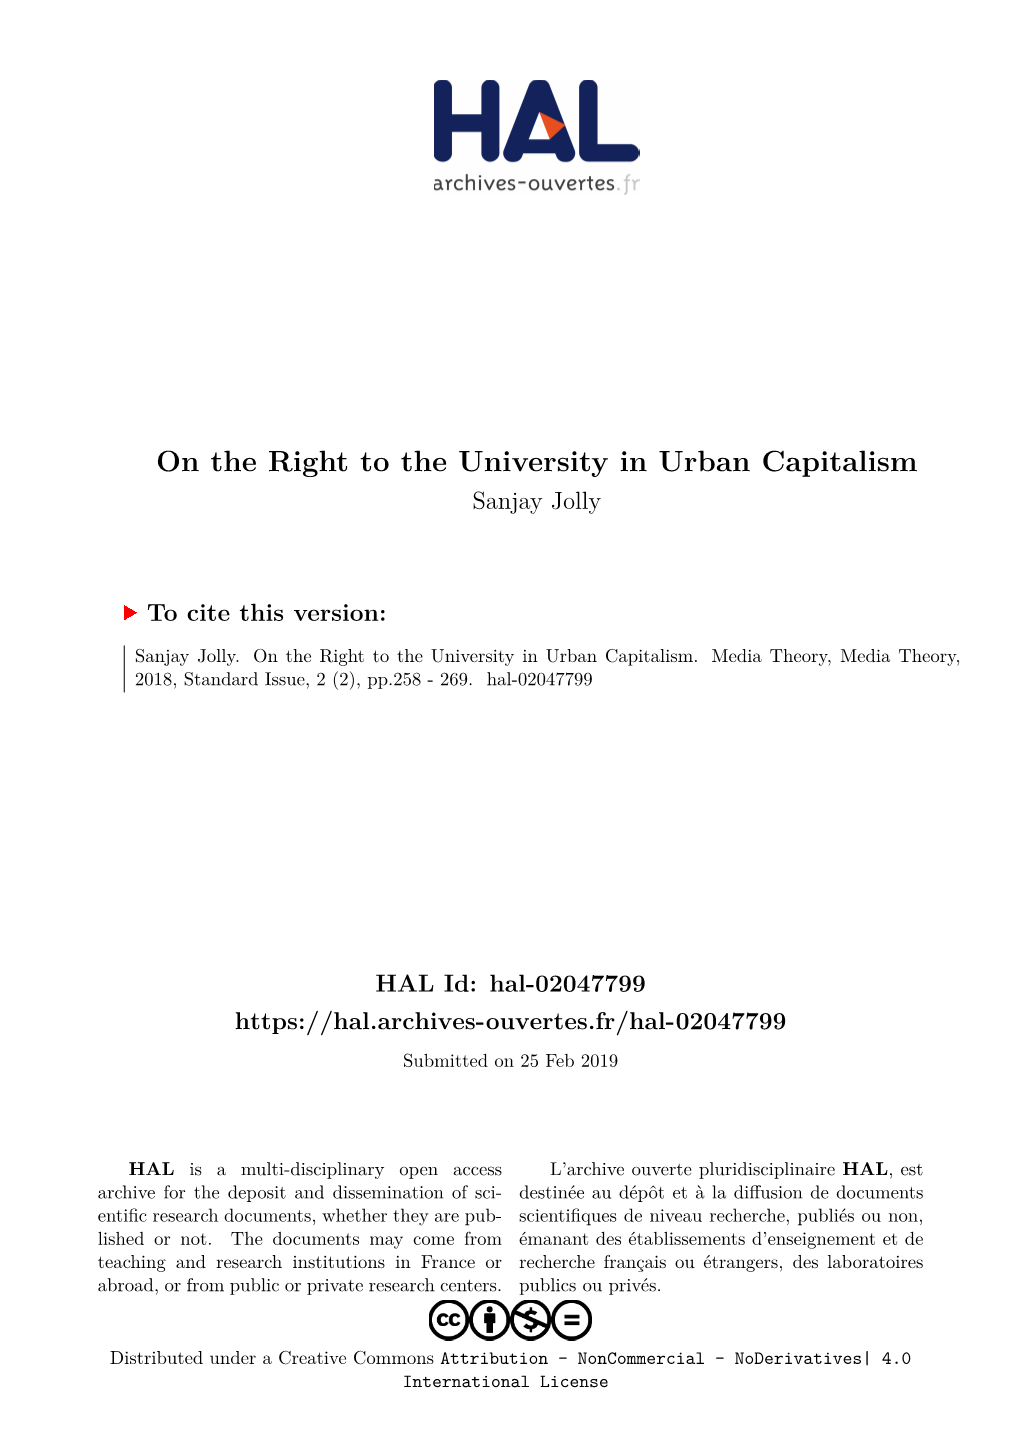 “On the Right to the University in Urban Capitalism.” Media Theory